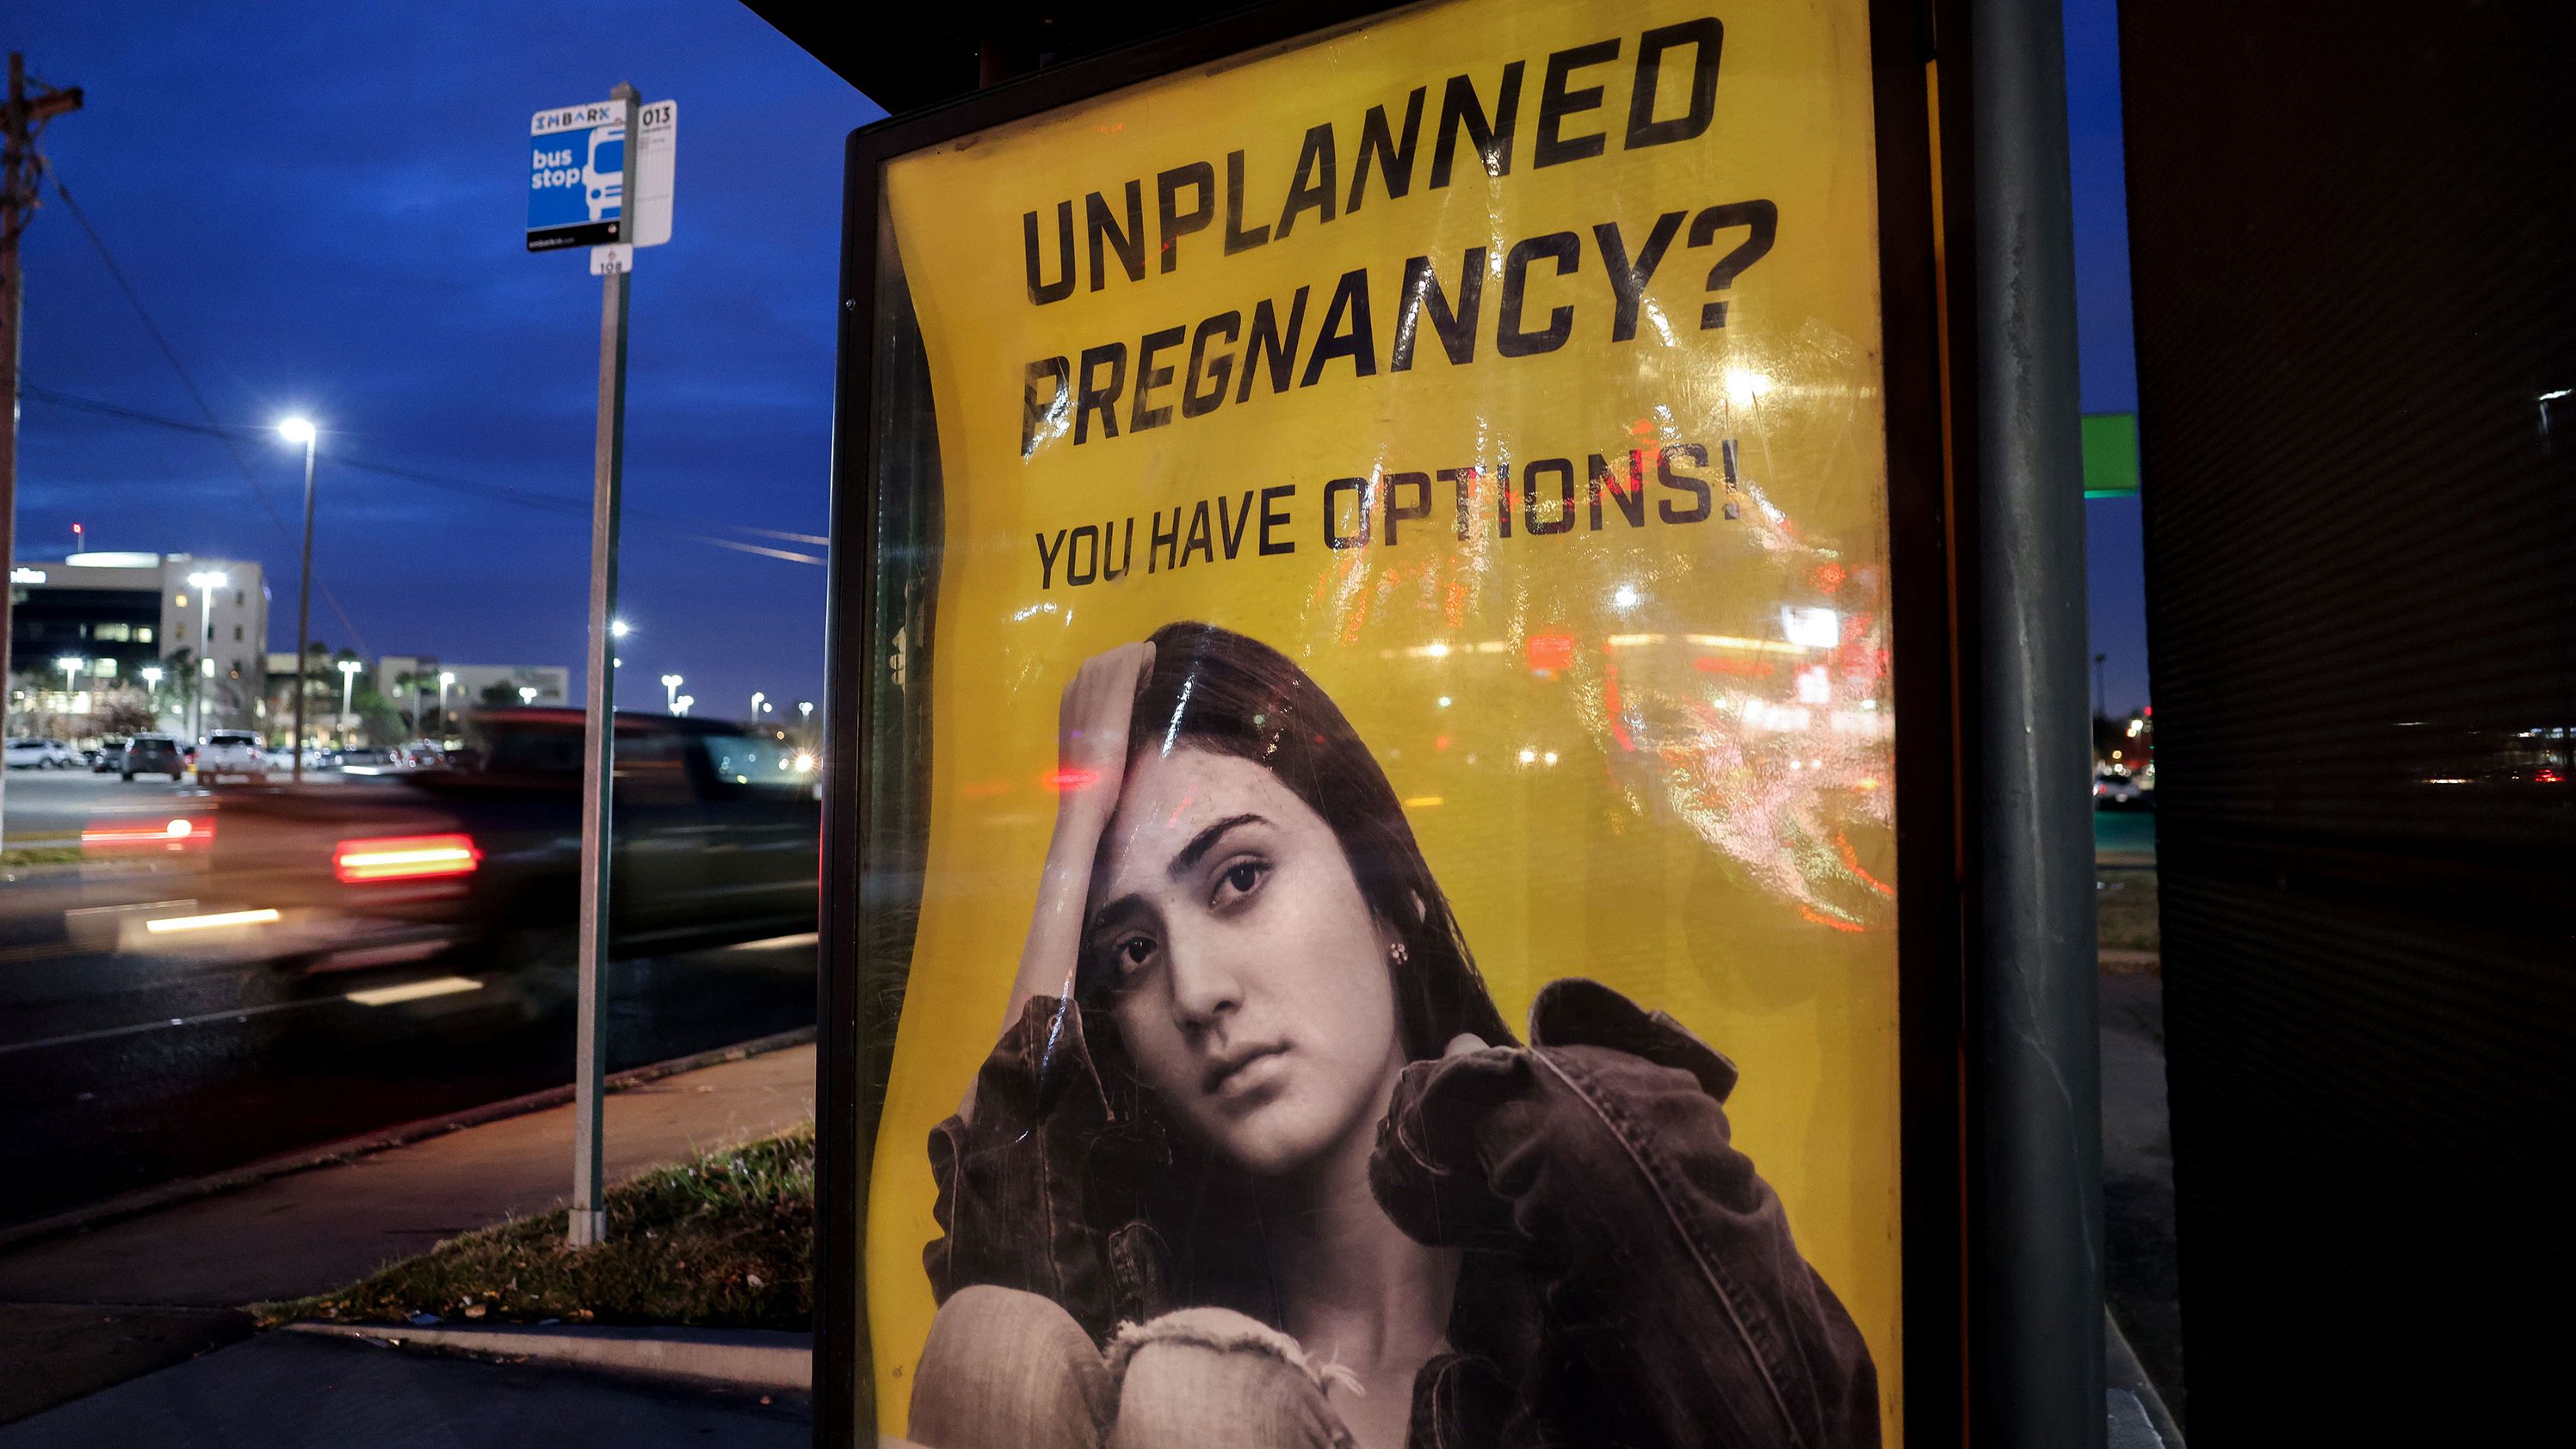 A billboard advertising adoption services targets pregnant women at a bus stop in Oklahoma City, Oklahoma, December 7, 2021. 